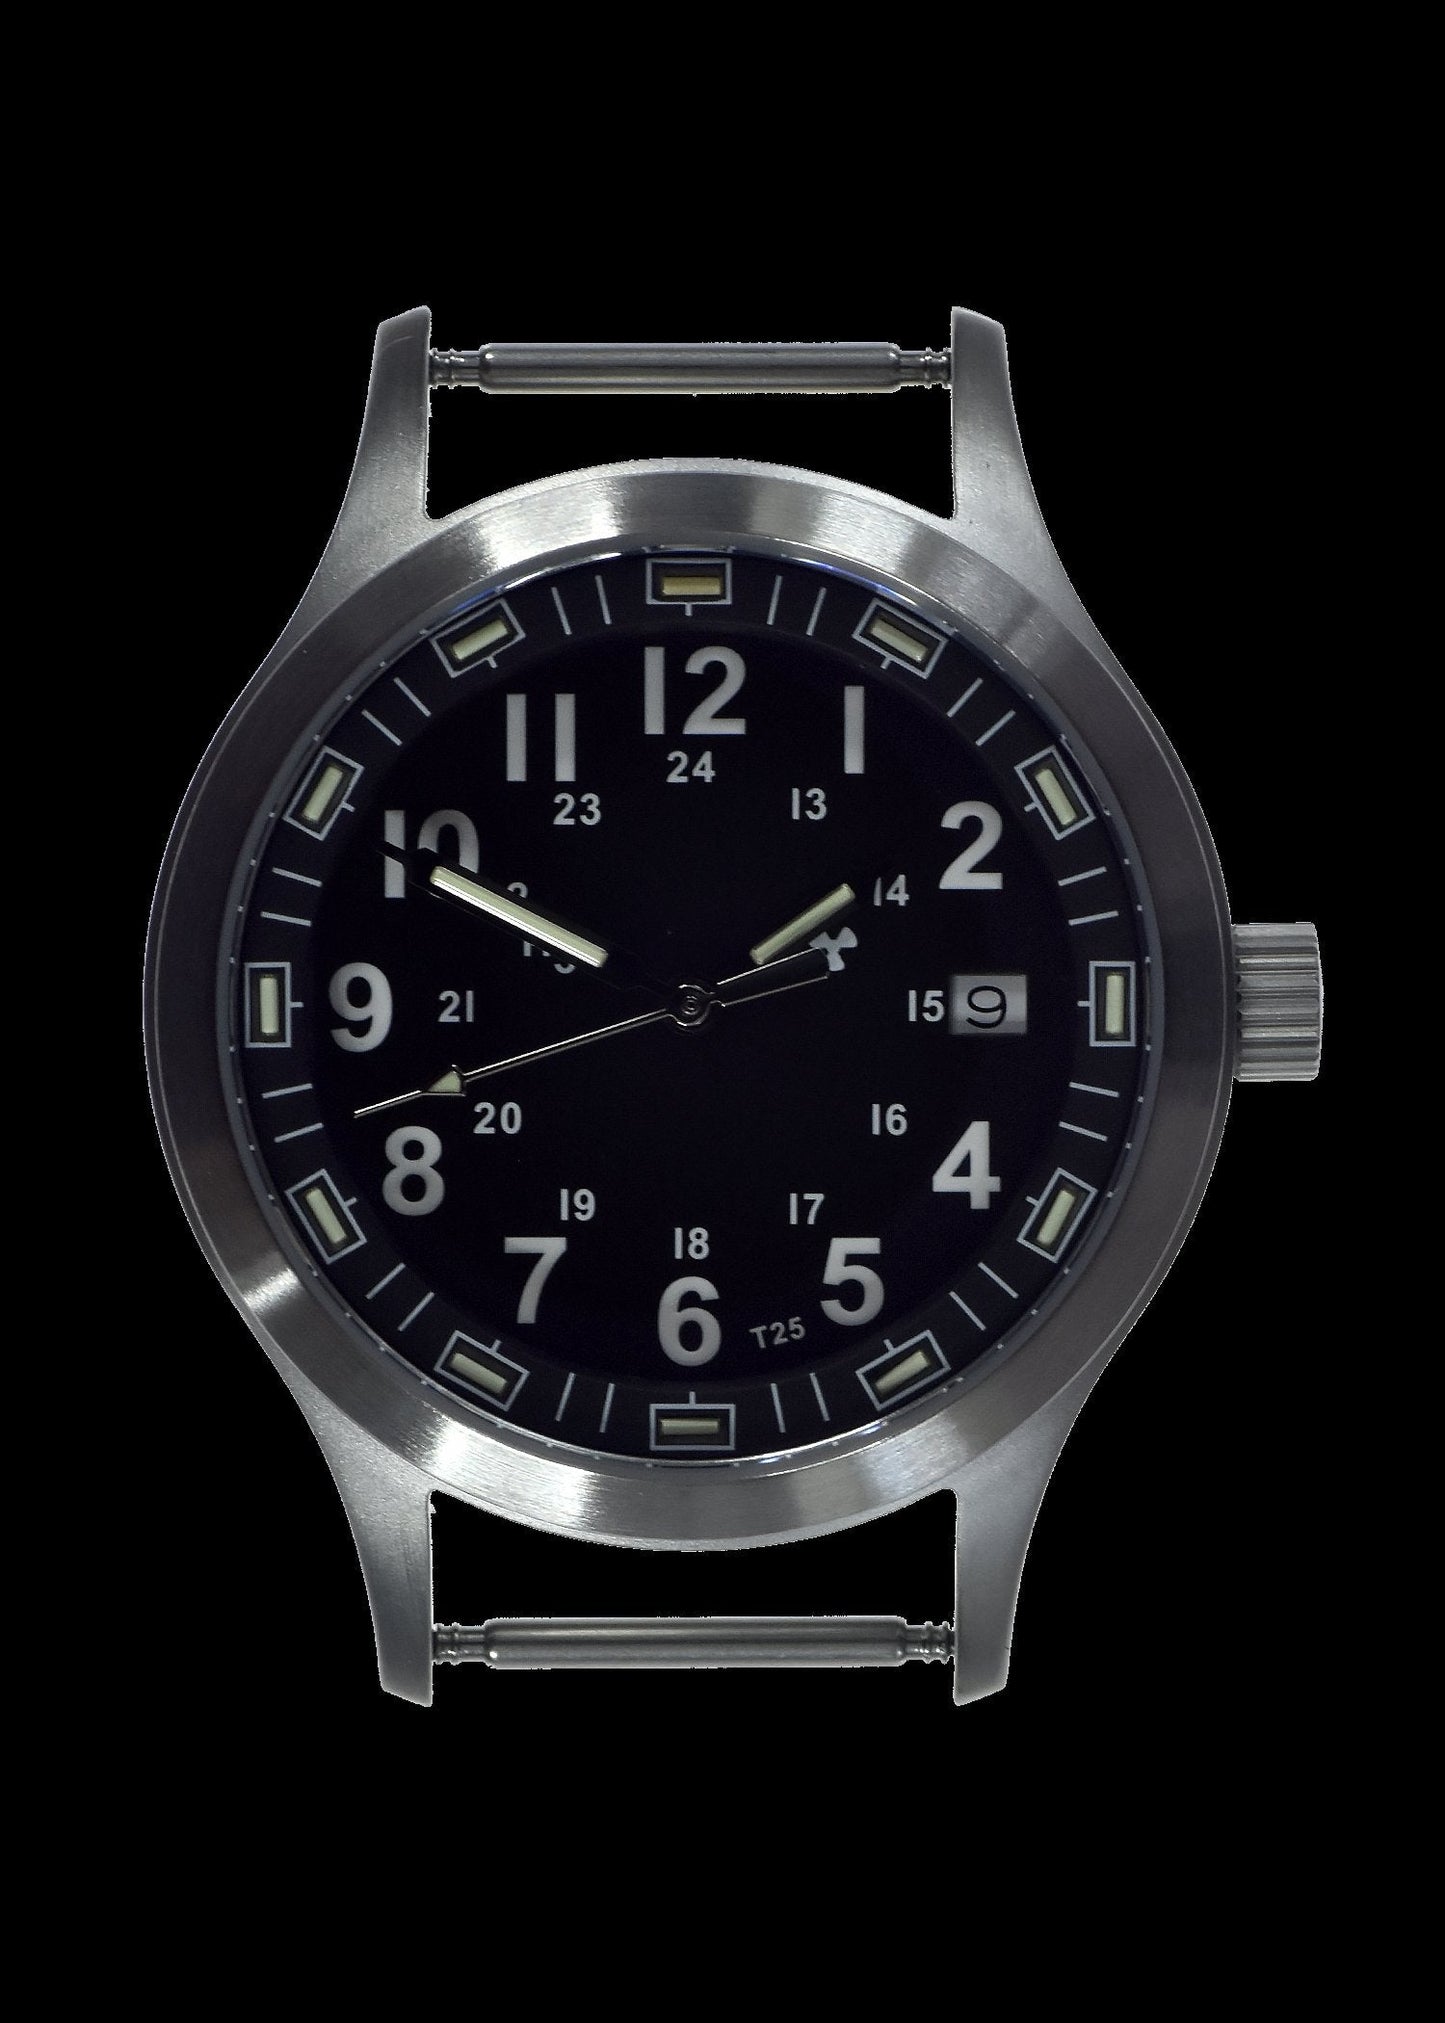 MWC MKIII Stainless Steel MKIII Model with Tritium GTLS Tubes (10 Year Battery Life Quartz Movement)